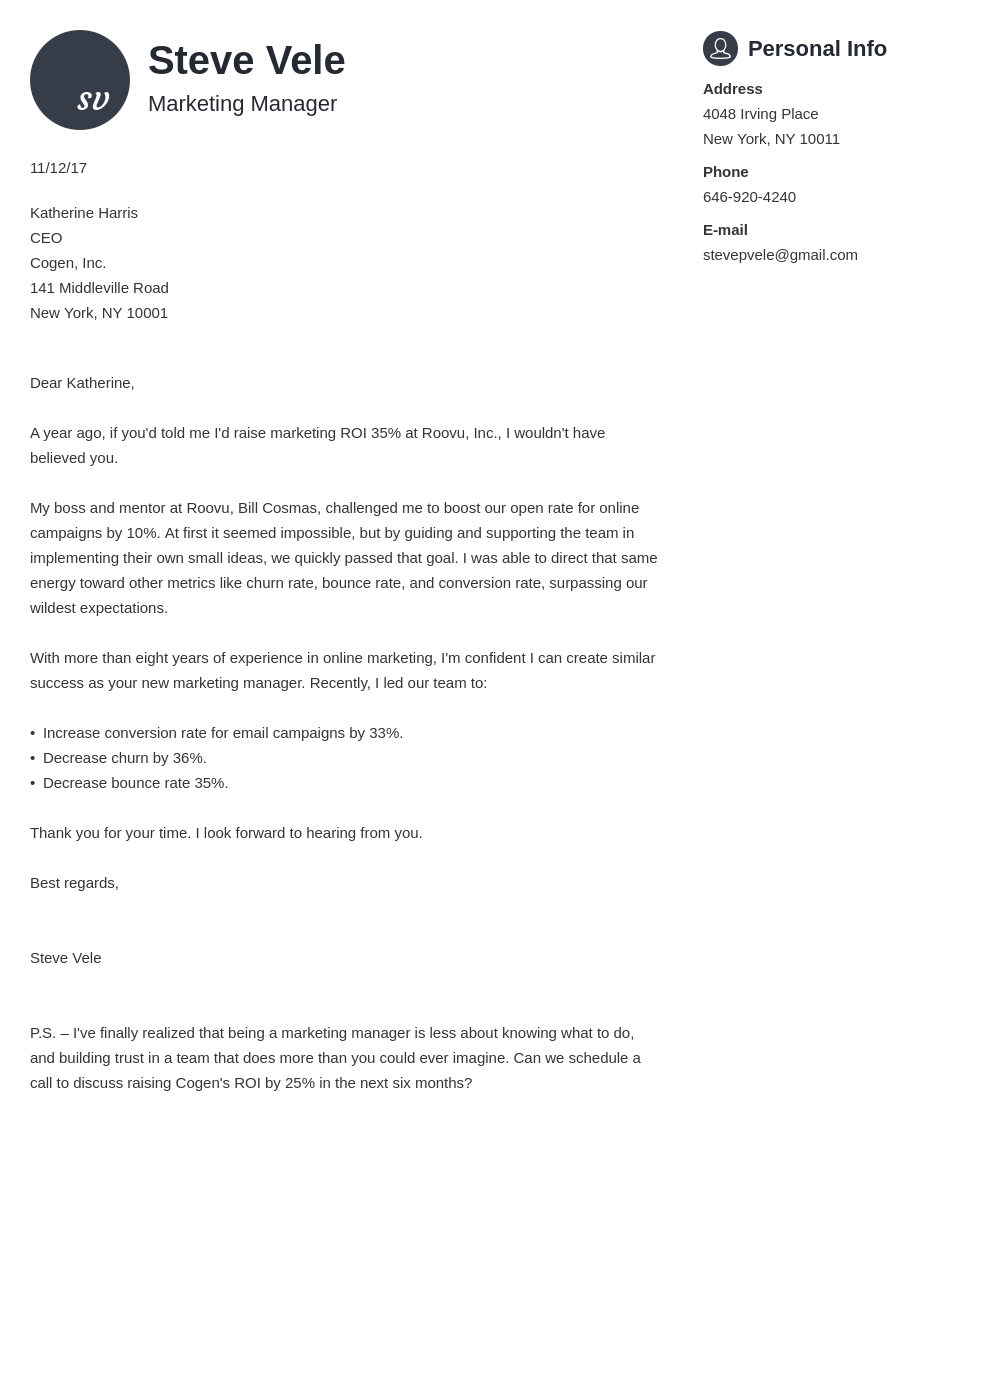 How to End a Cover Letter [20+ Closing Paragraph Examples]